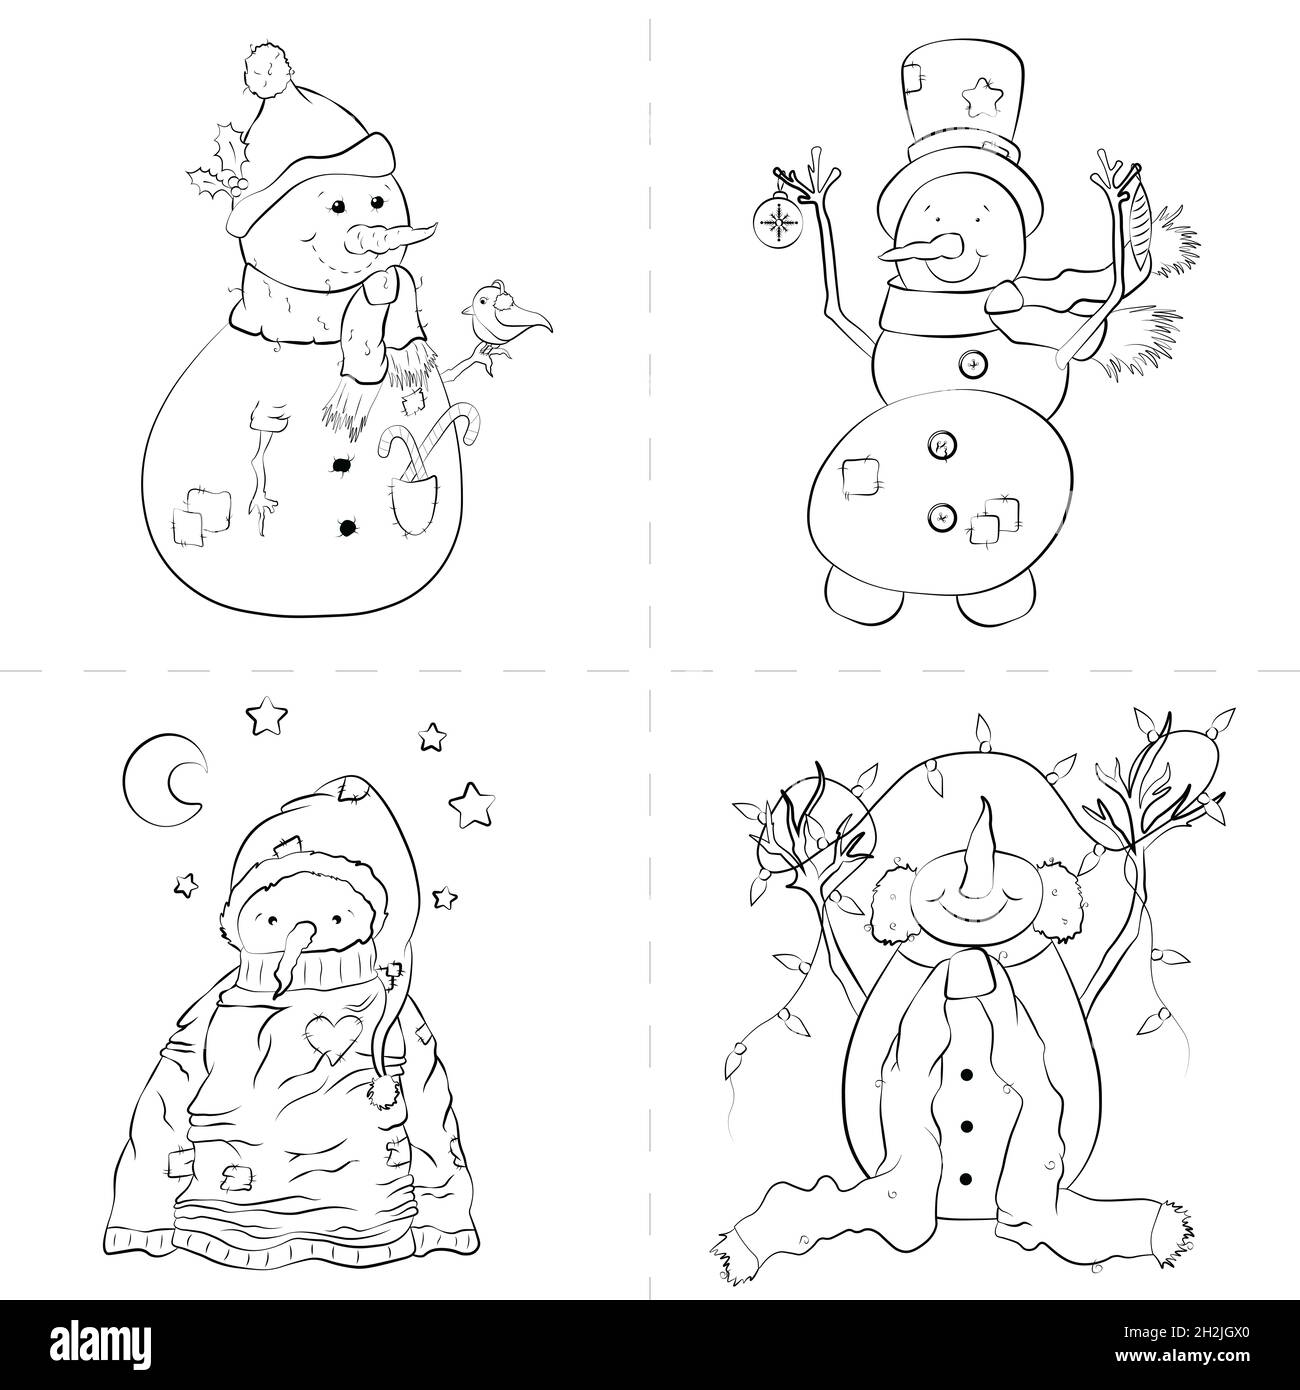 Illustration of funny snowman Christmas character set coloring book page Stock Photo